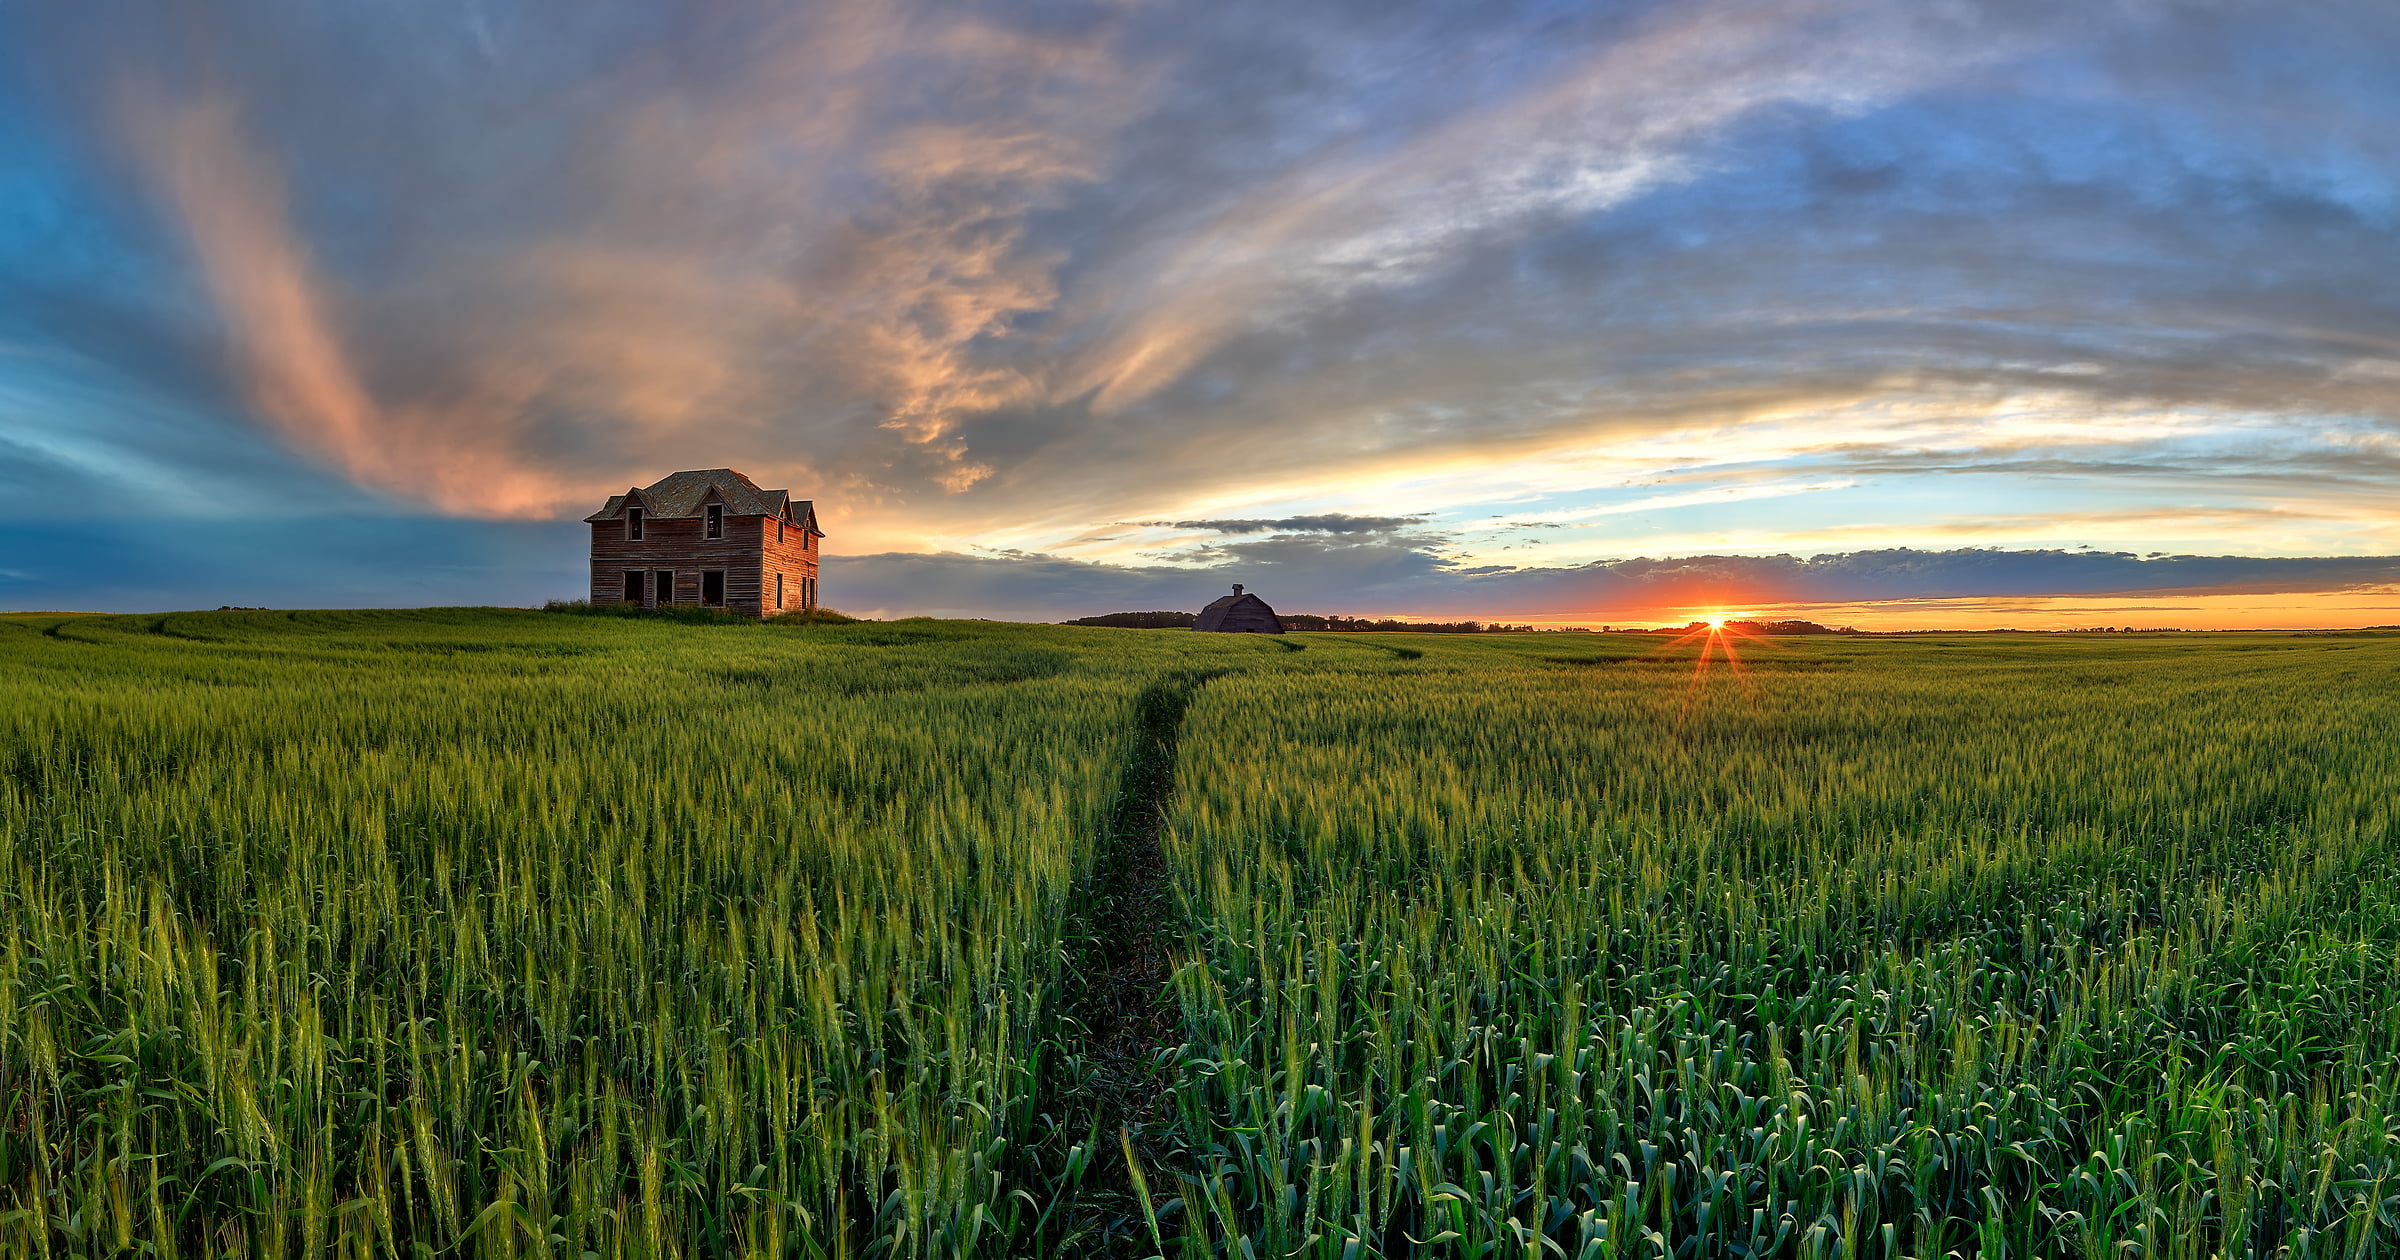 89 megapixels! A very high resolution, large-format VAST photo of farmland, grasslands, the prairie, and an old abandoned house; fine art landscape photo created at sunset by Scott Dimond on the Great Plains in Alberta, Canada